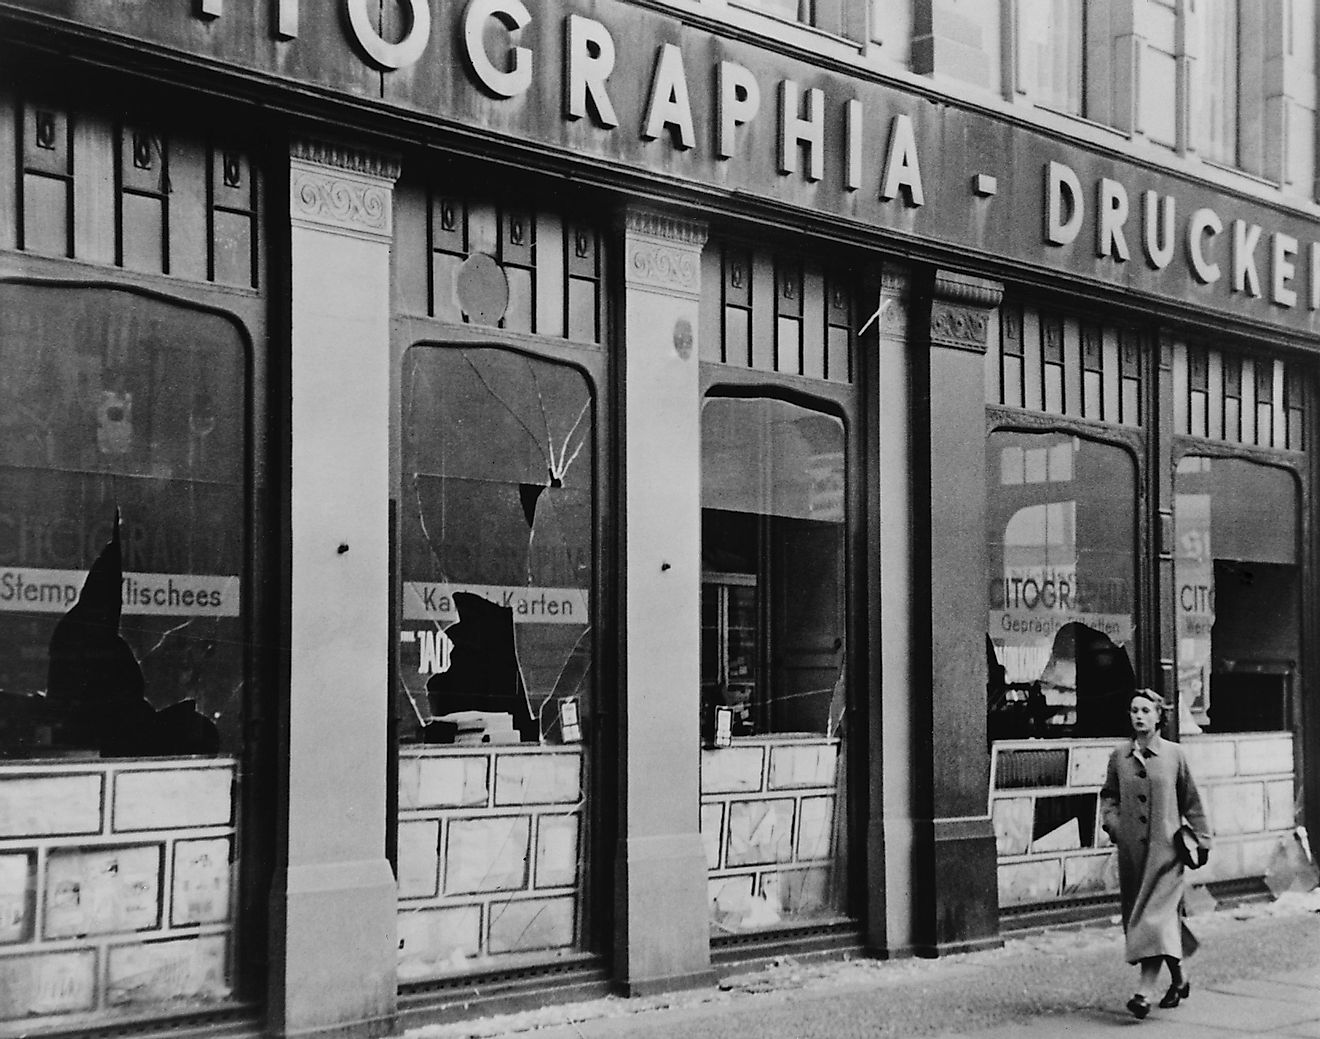 Windows of a Jewish owned printing business smashed during Kristallnacht, Berlin. November 9_10, 1938.